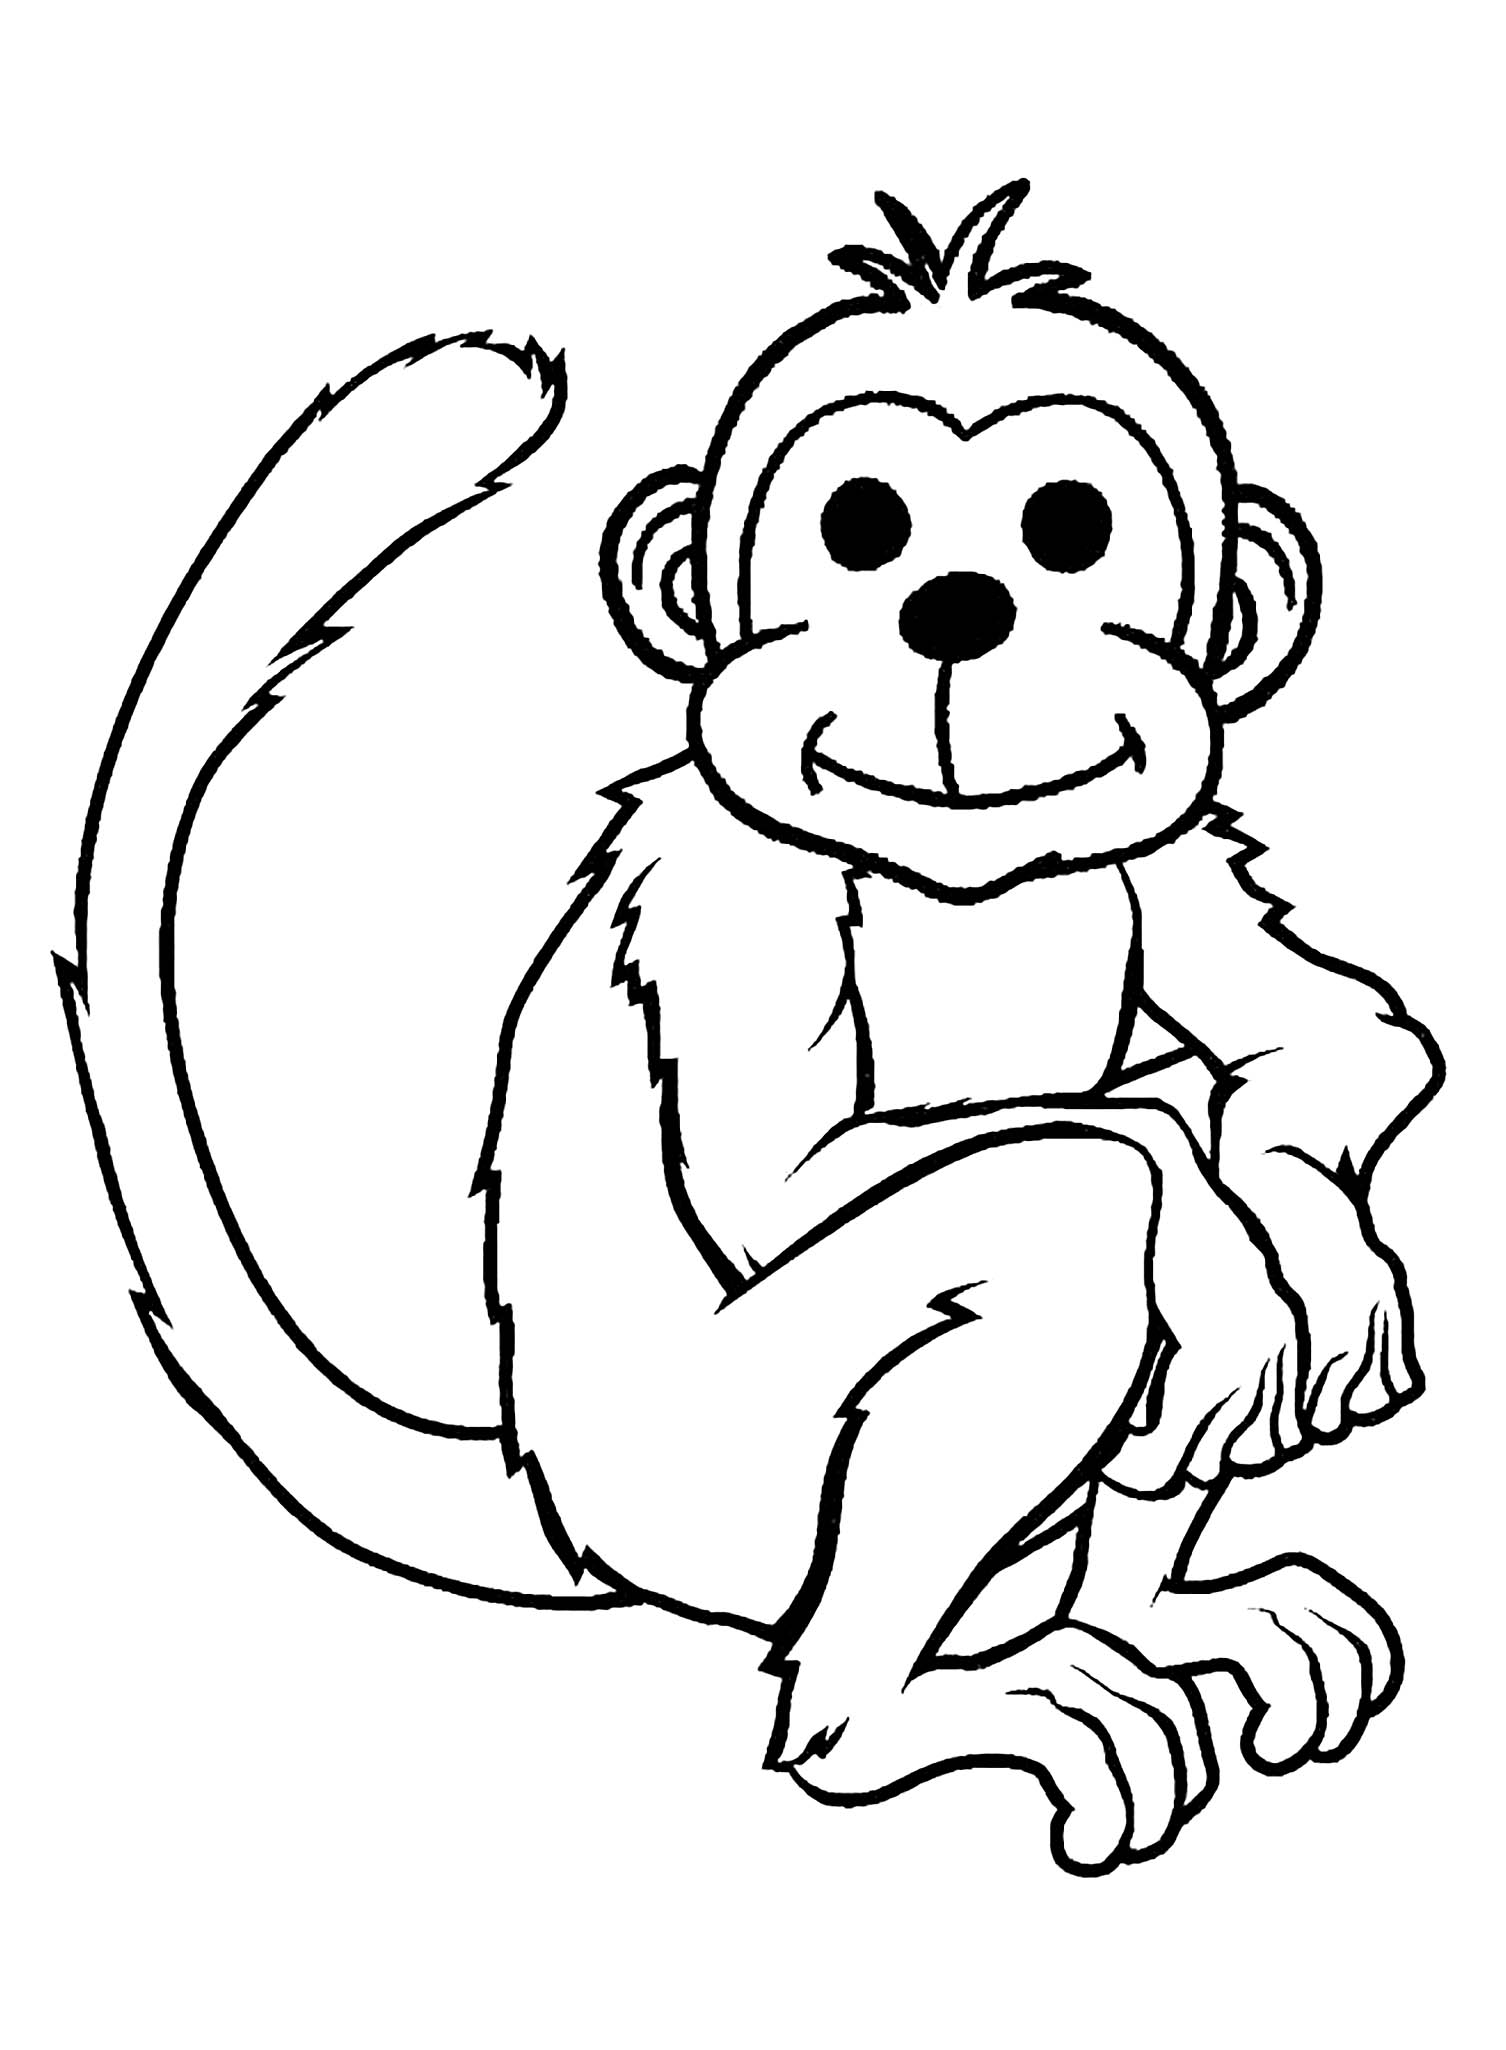 printable-monkey-pictures-printable-word-searches